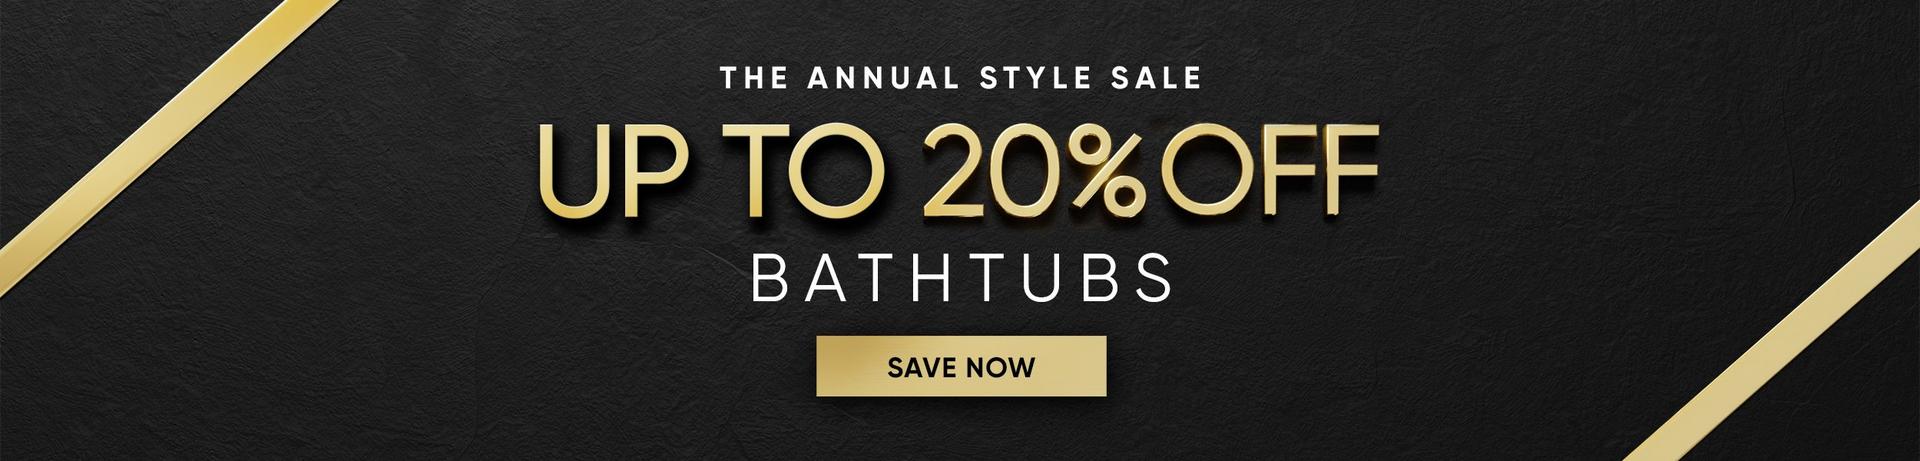 The Annual Style Sale - Up to 20% Off Bathtubs